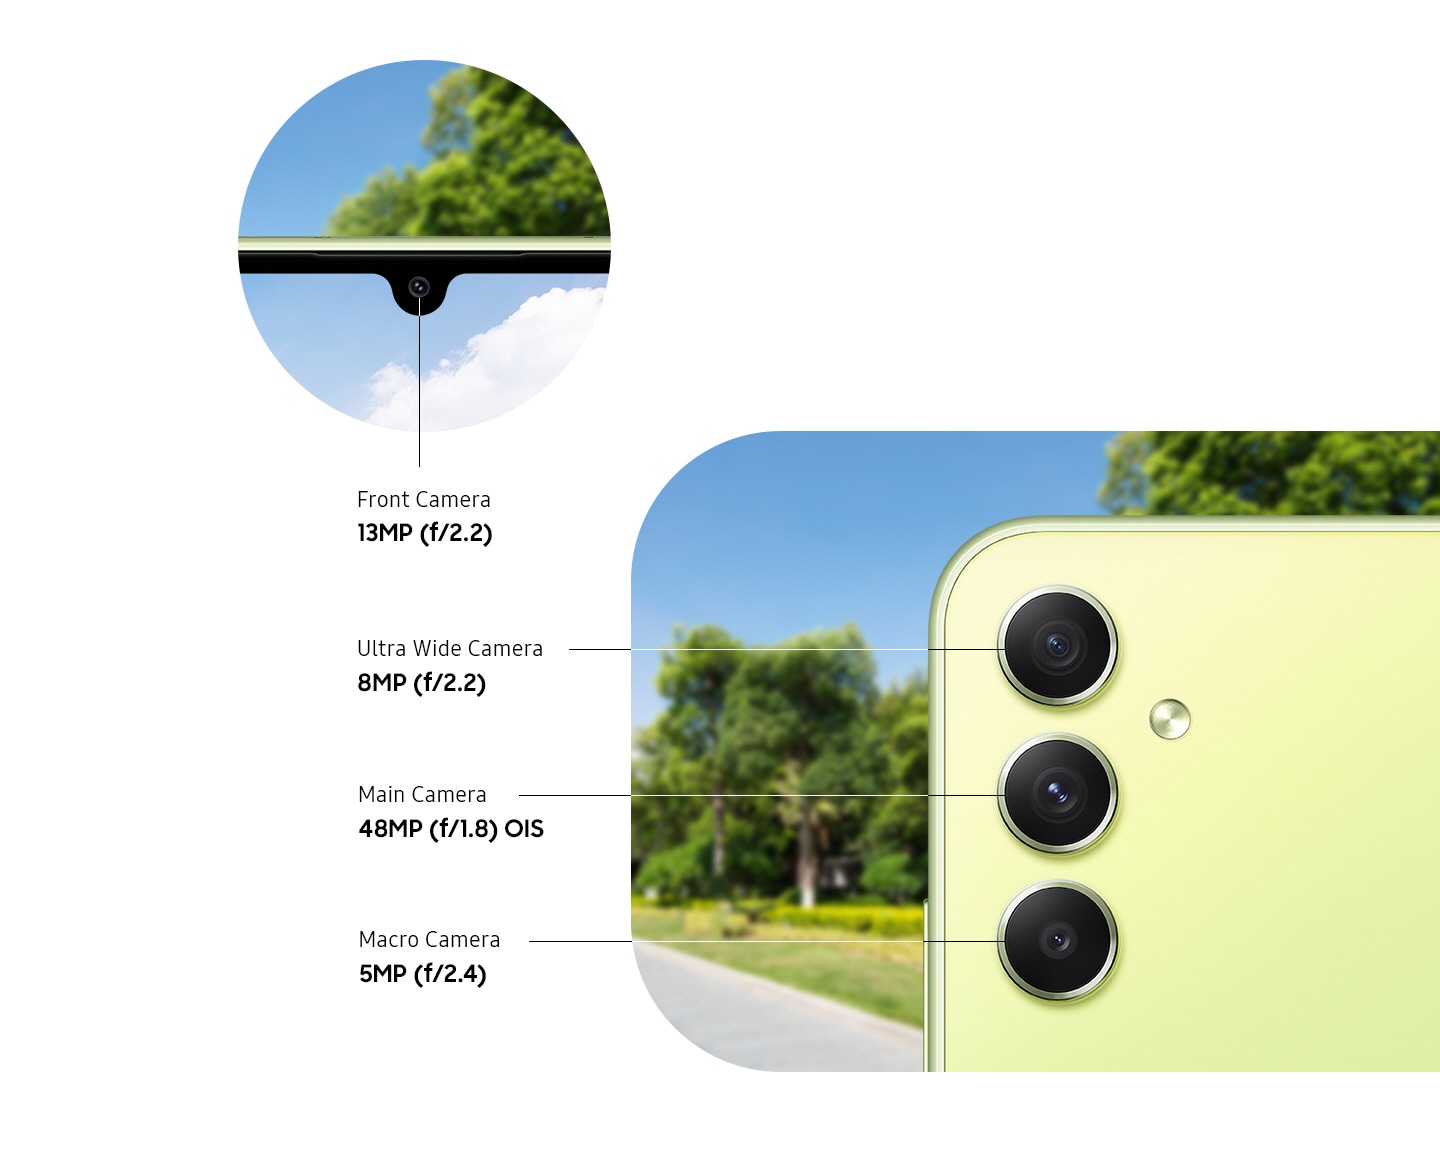 The front and back cameras of the Galaxy A34 5G in Awesome Lime are shown, including the 13MP F2.2 Front Camera, 8MP F2.2 Ultra Wide Camera, 48MP F1.8 OIS Main Camera and the 5MP F2.4 Macro Camera.